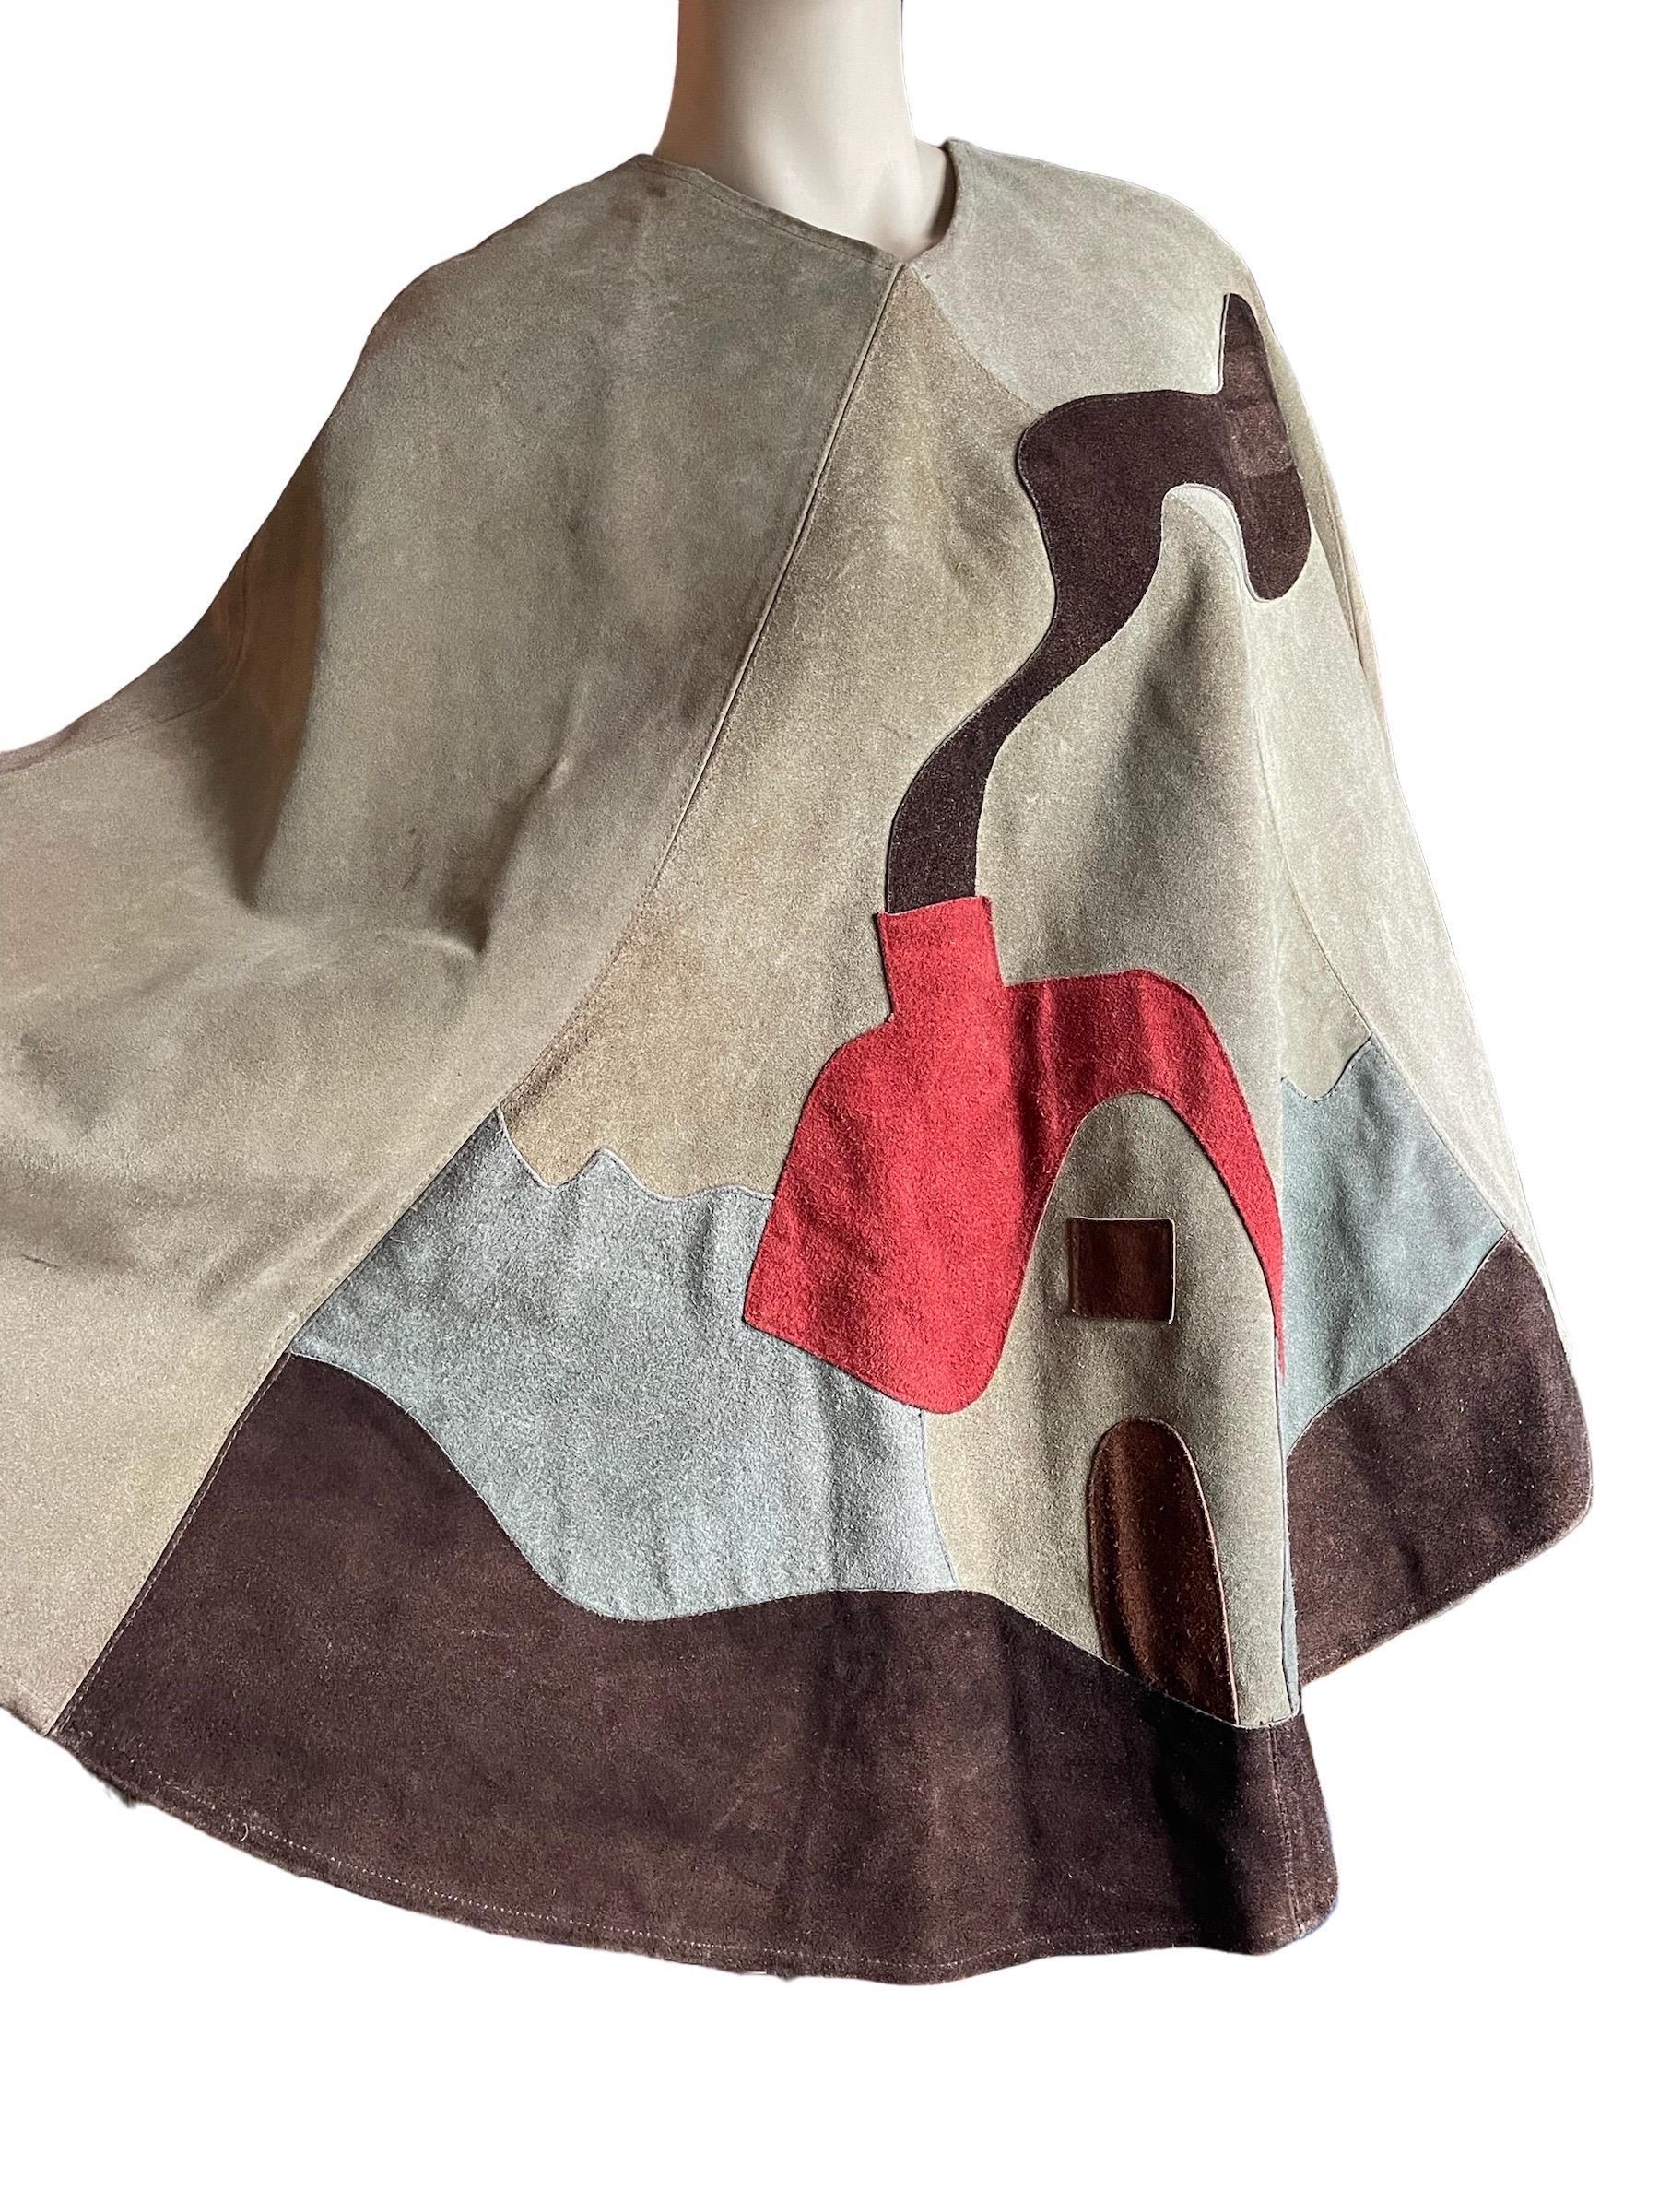 Women's or Men's 1970s Suede Patchwork Poncho  For Sale